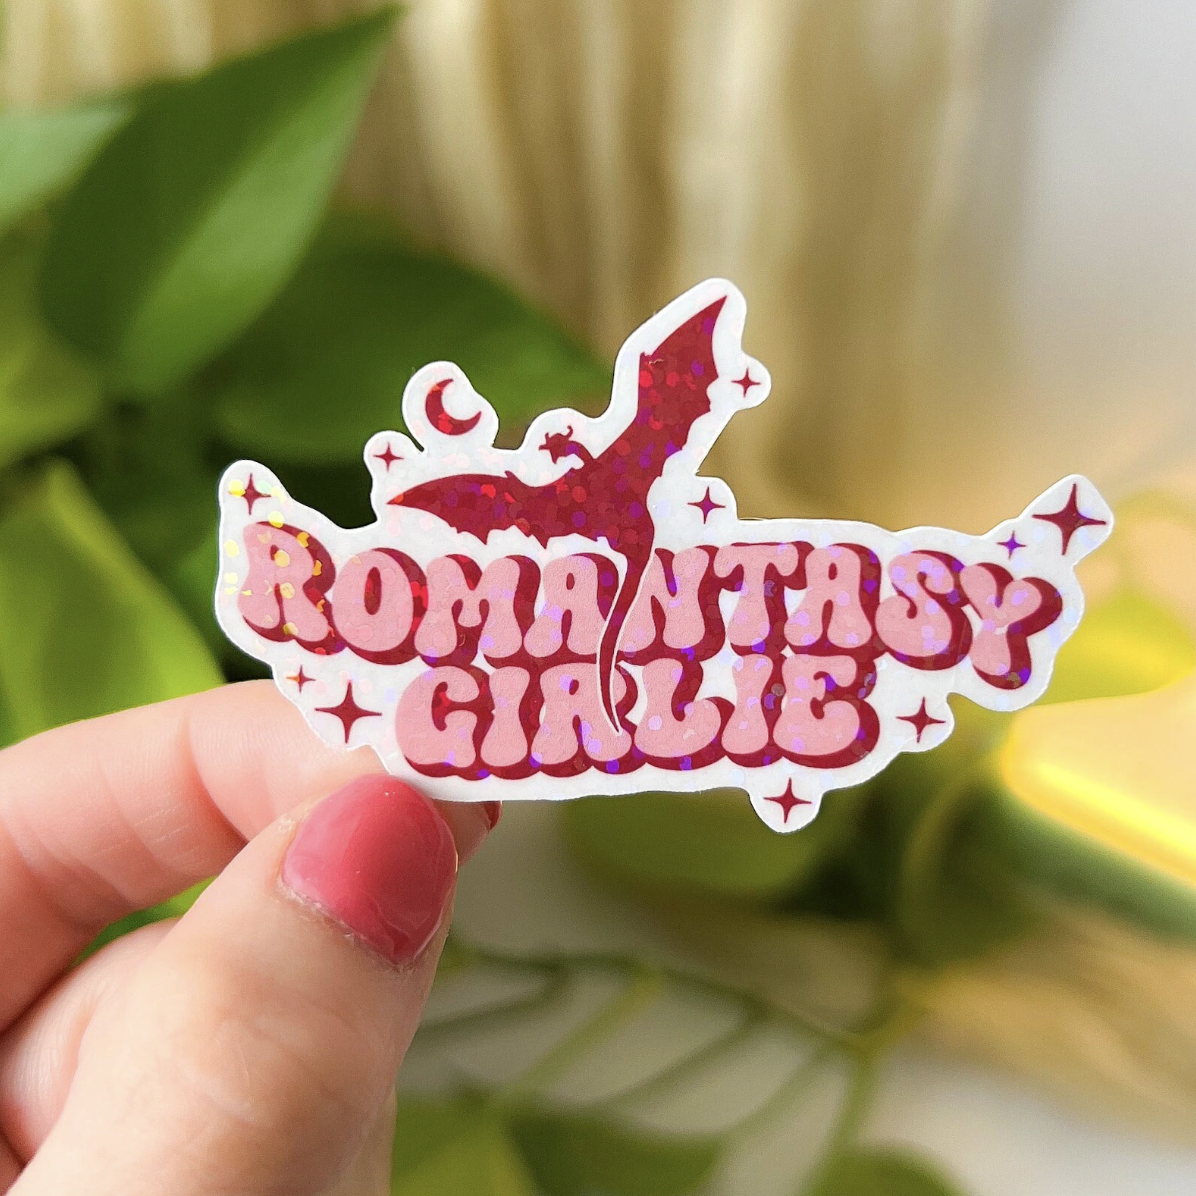 Image of a pink sticker with a dragon that says "romantasy girlie" held up by a white hand with pink nails